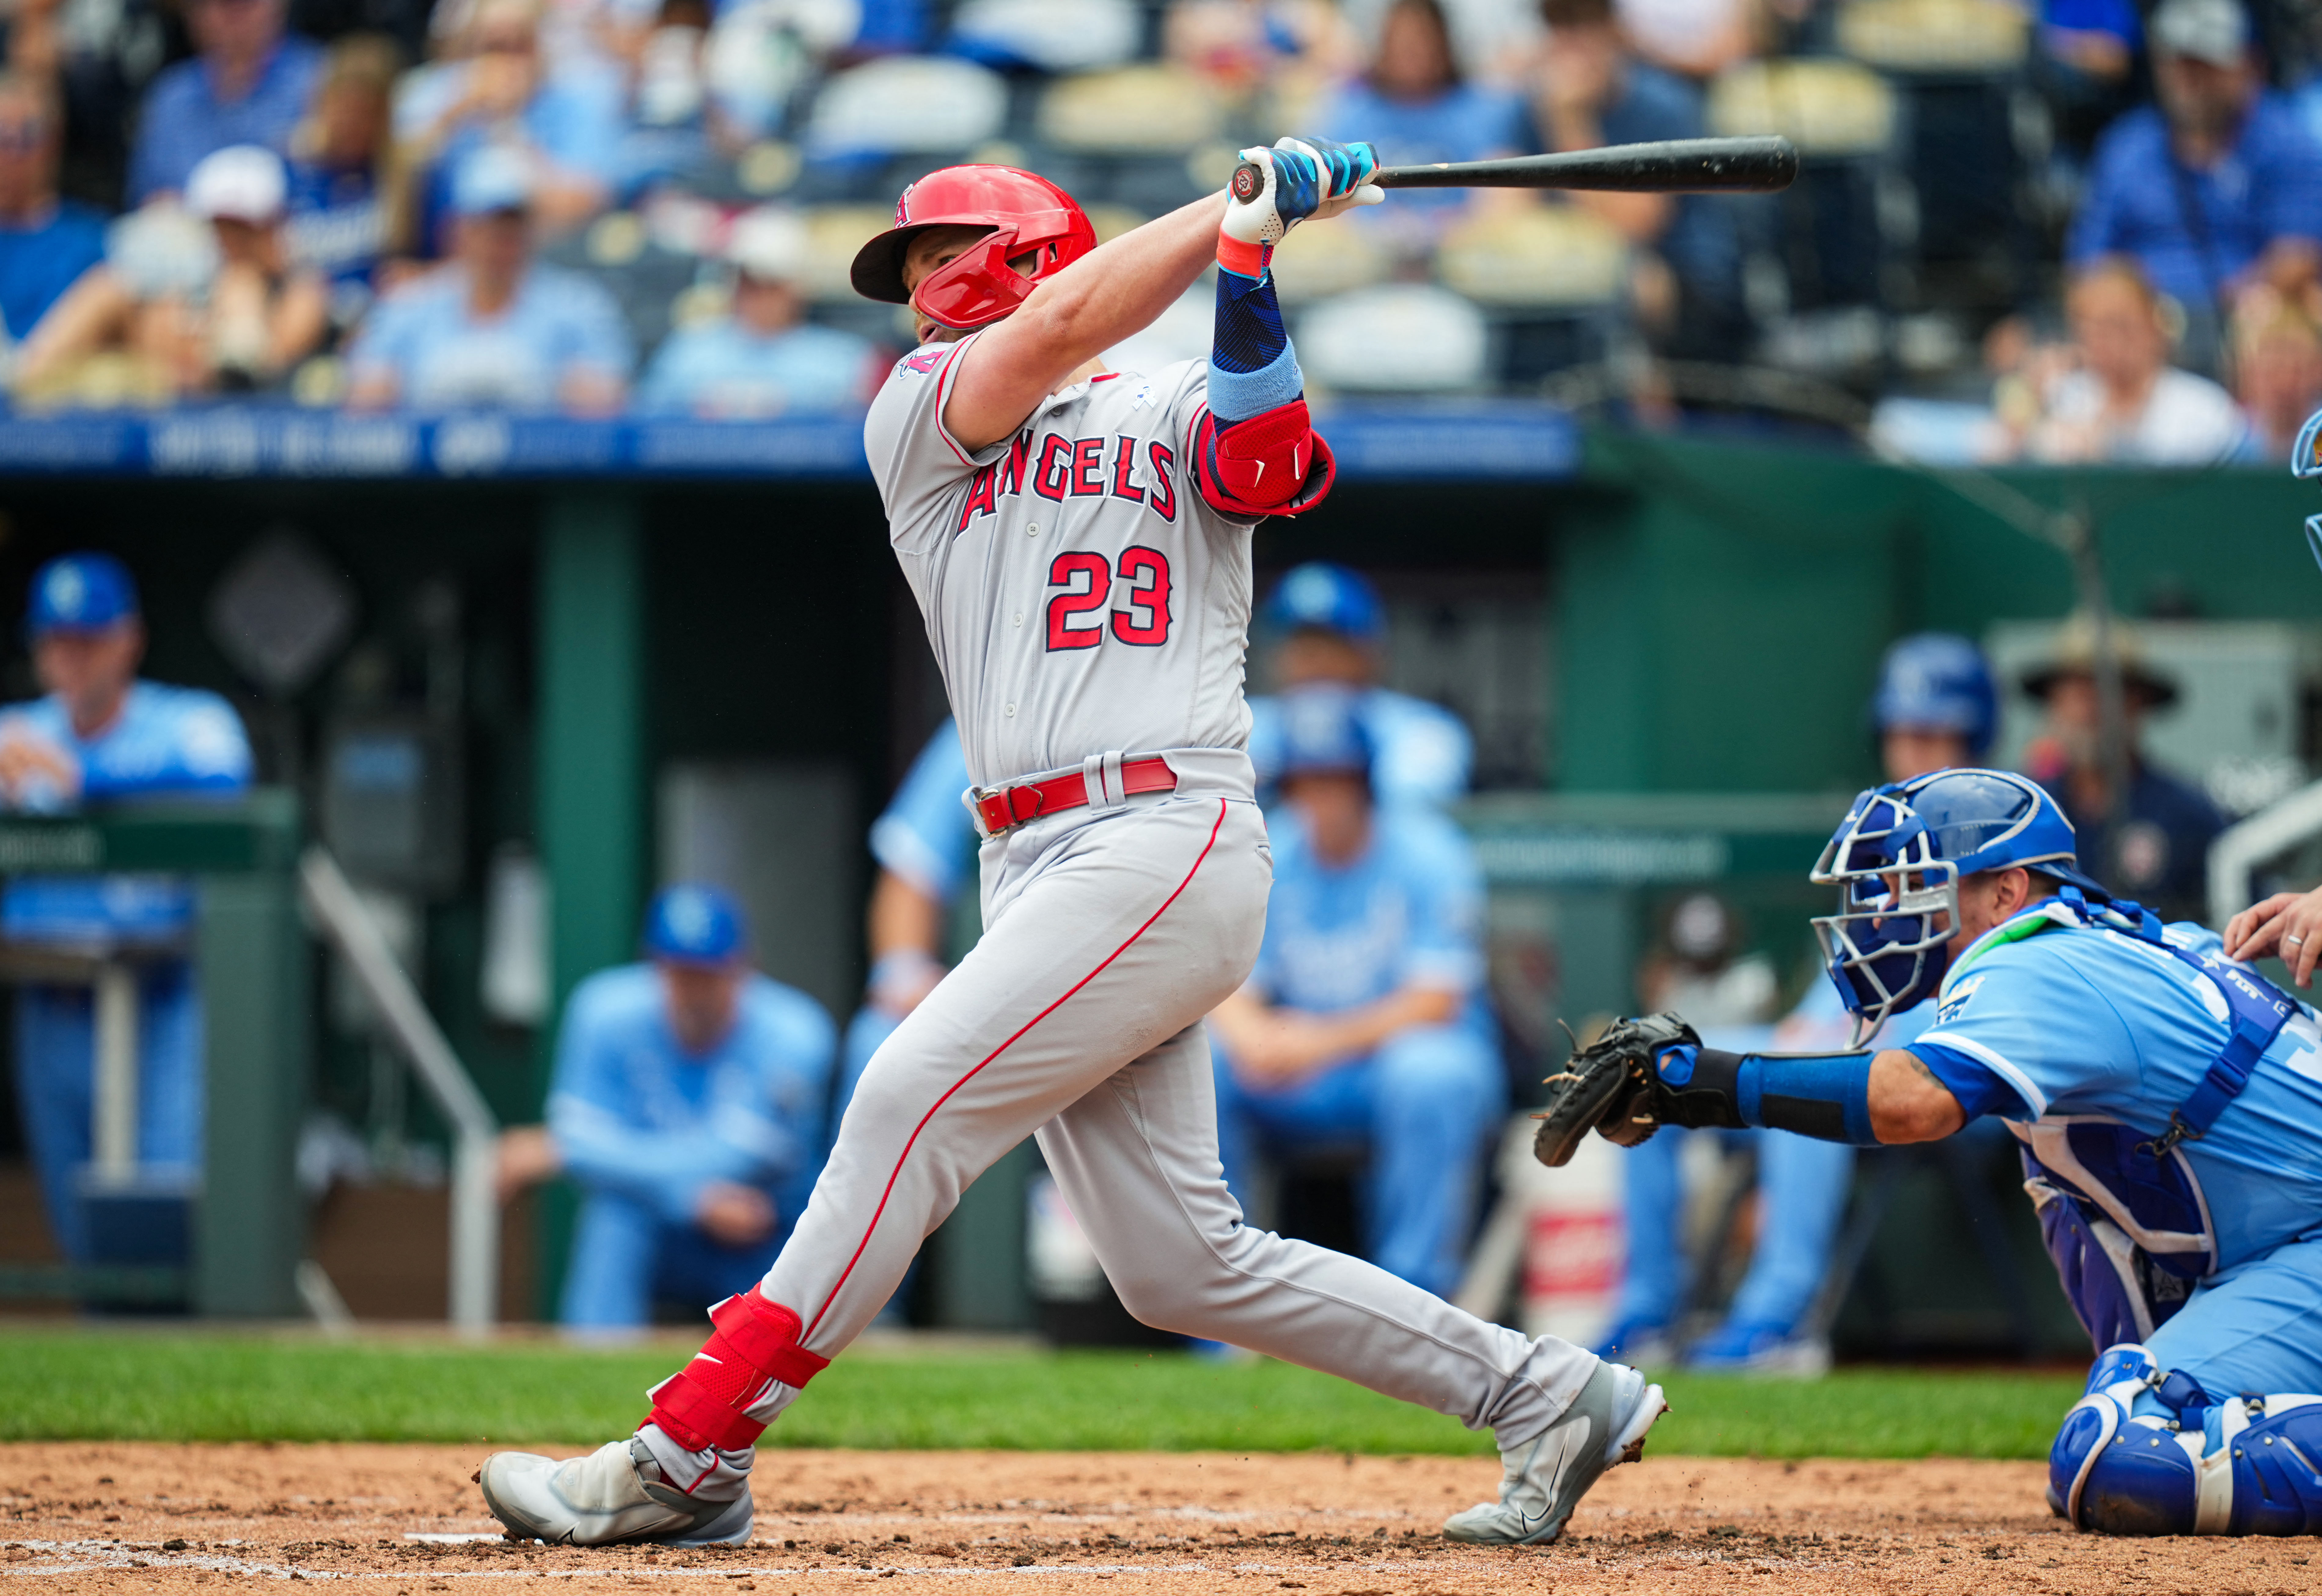 Shohei Ohtani, Mike Trout go back-to-back as Angels top Royals